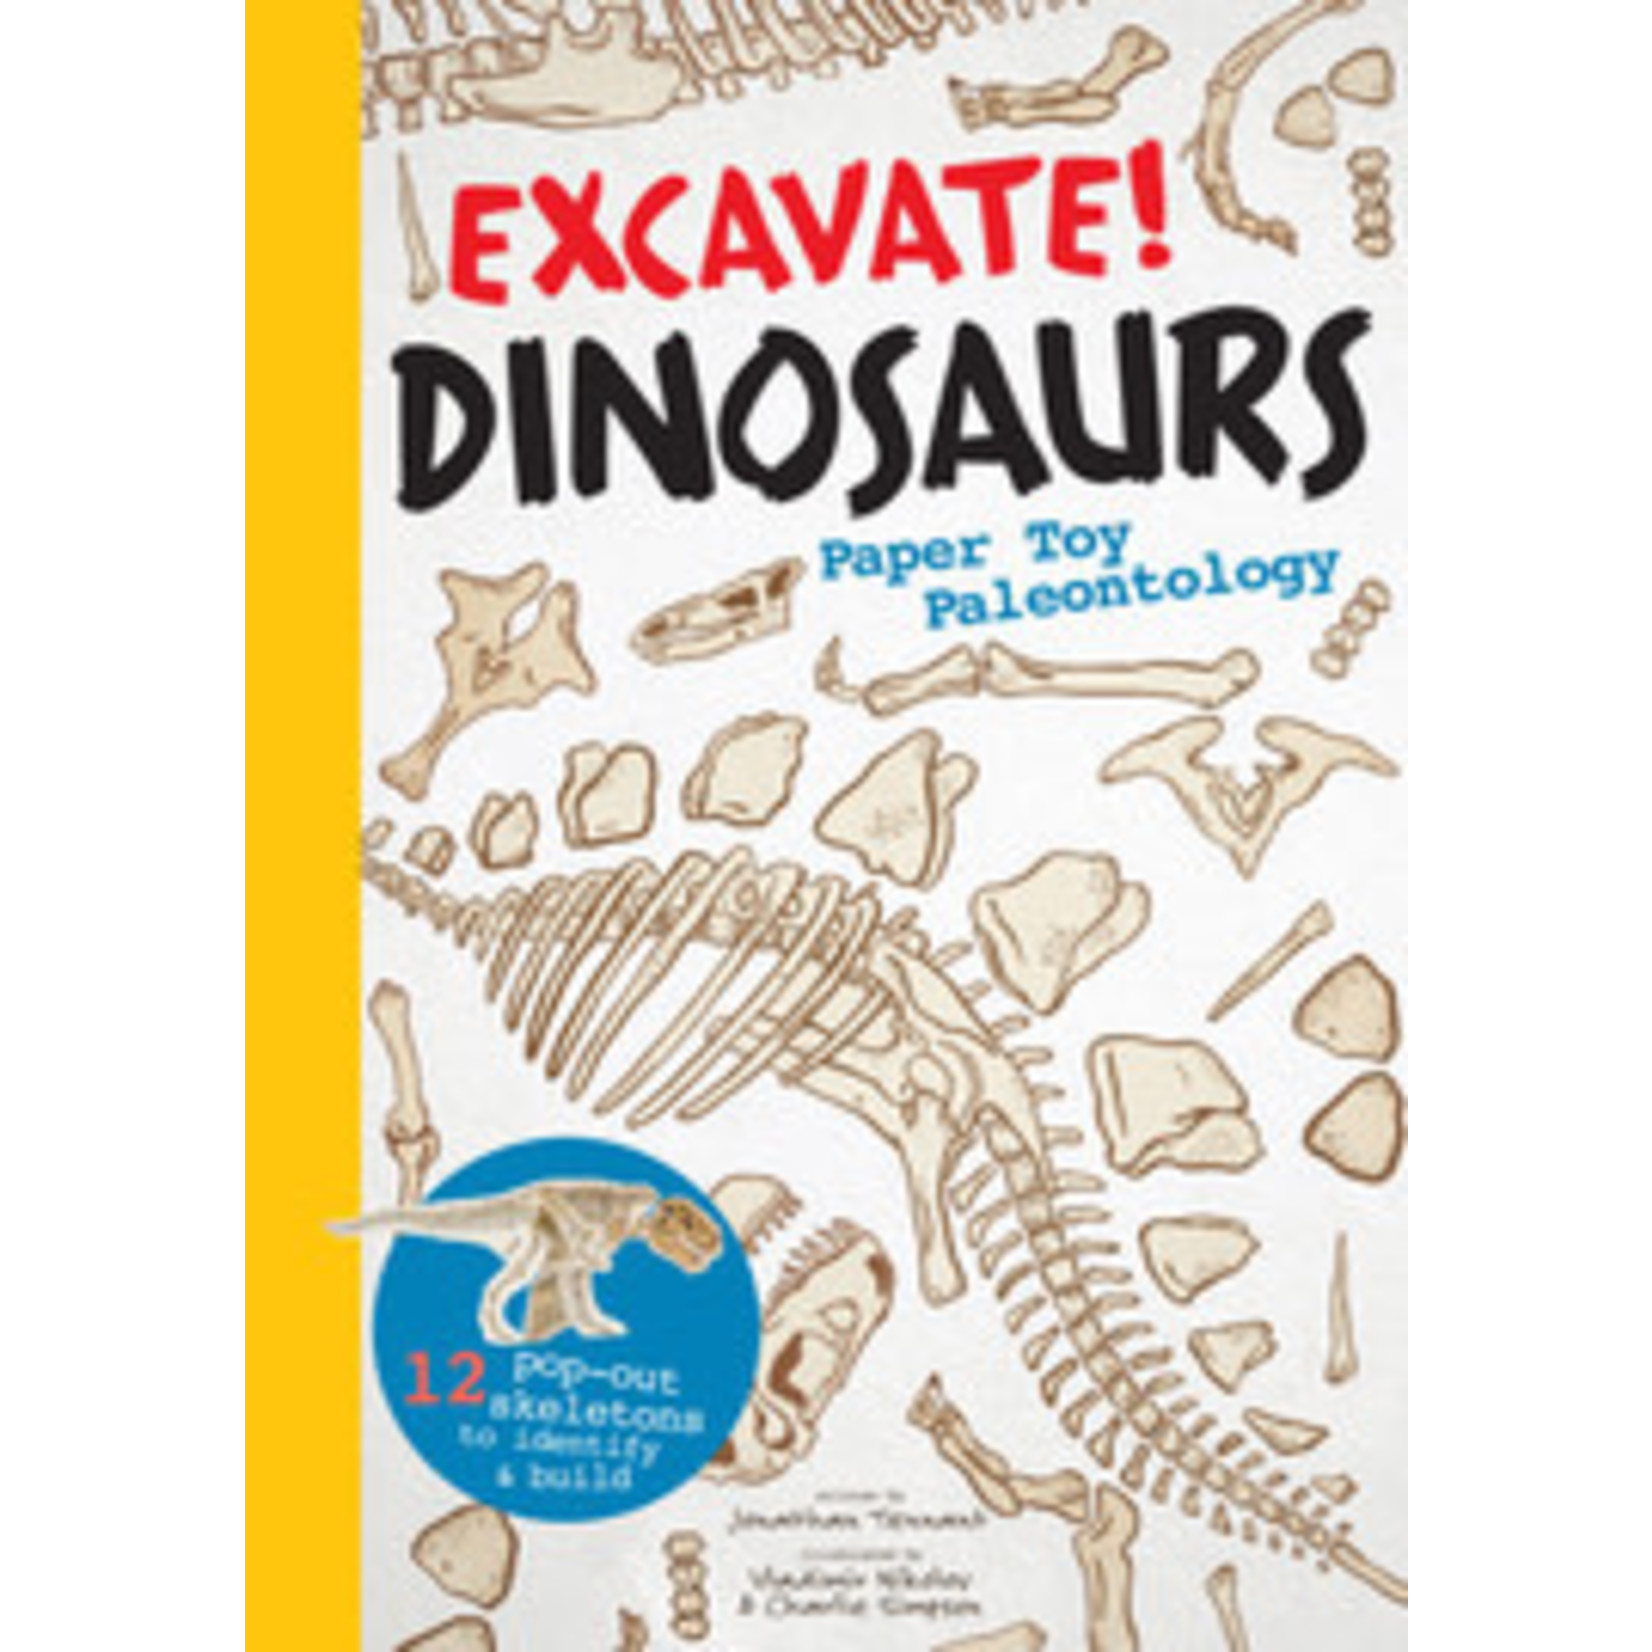 EXCAVATE DINOSAURS PAPER TOY BOOK